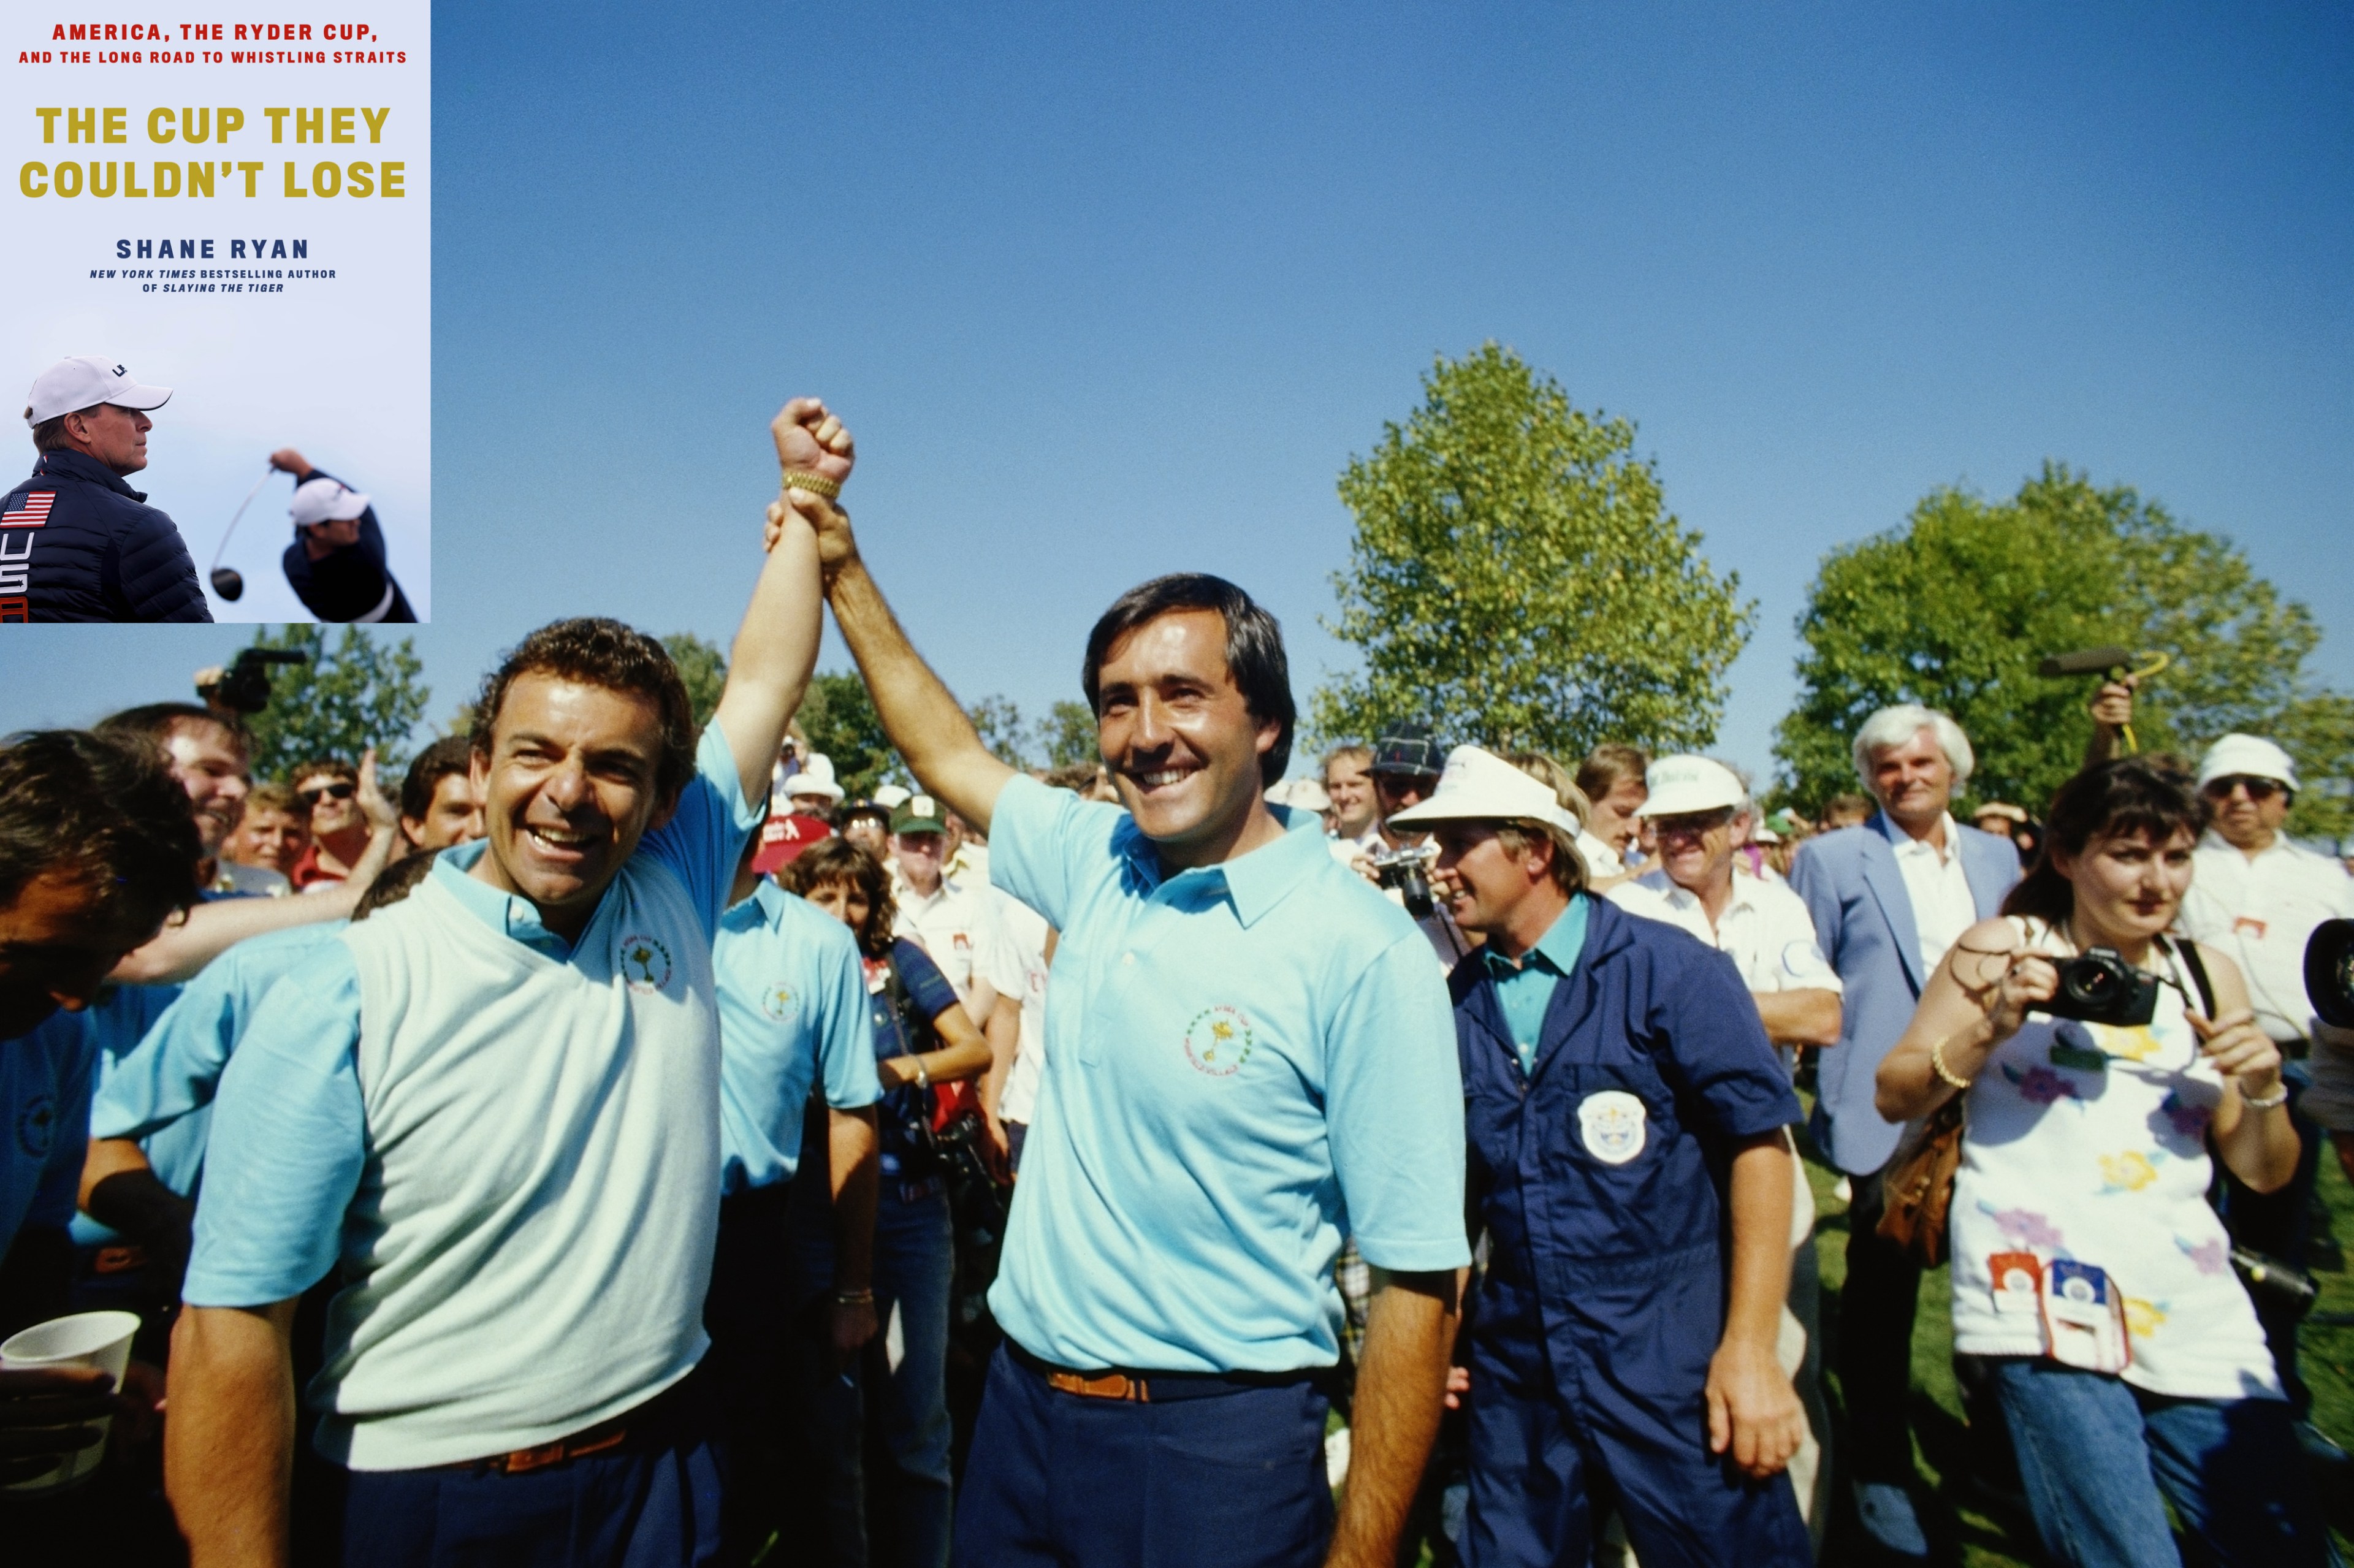 Golfers Tony Jacklin and Seve Ballesteros (right) celebrate the victory of the European team in the Ryder Cup in 1987.